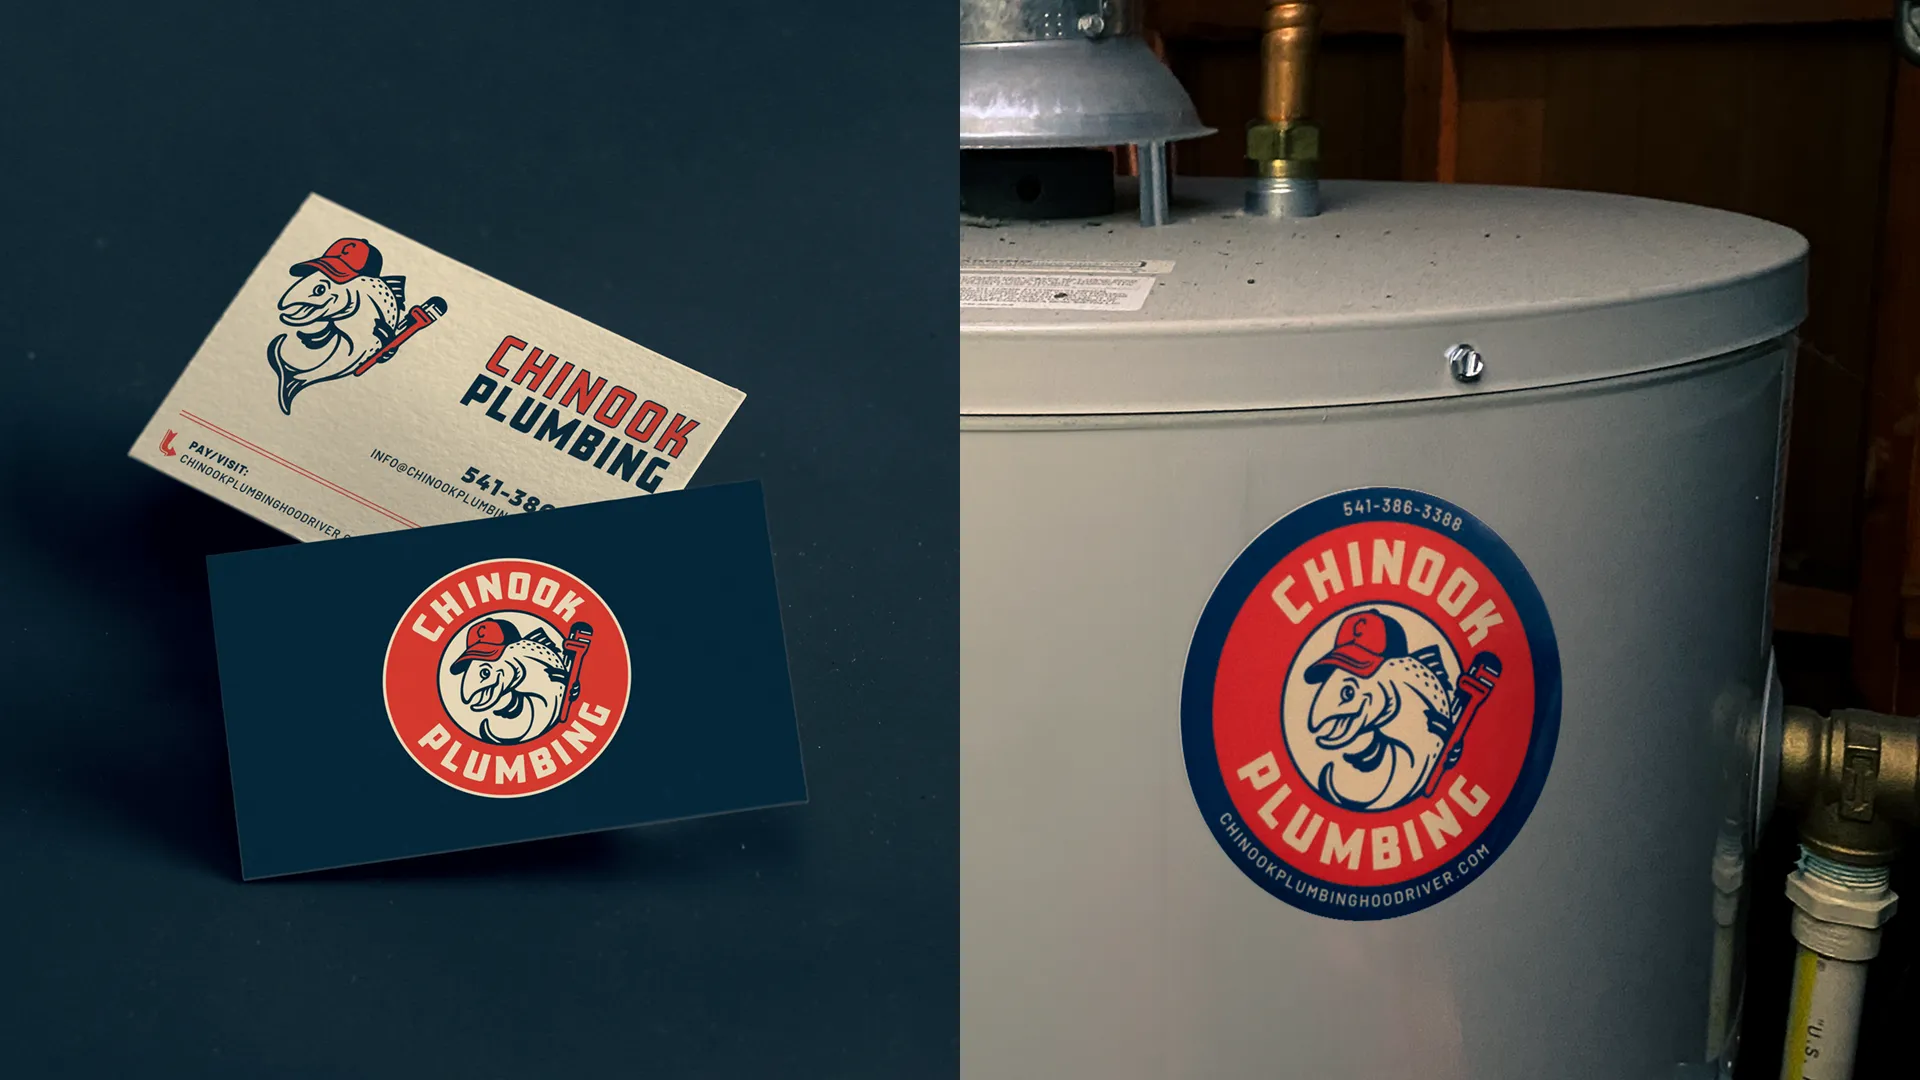 split image with Chinook Plumbing business cards and sticker on water heater